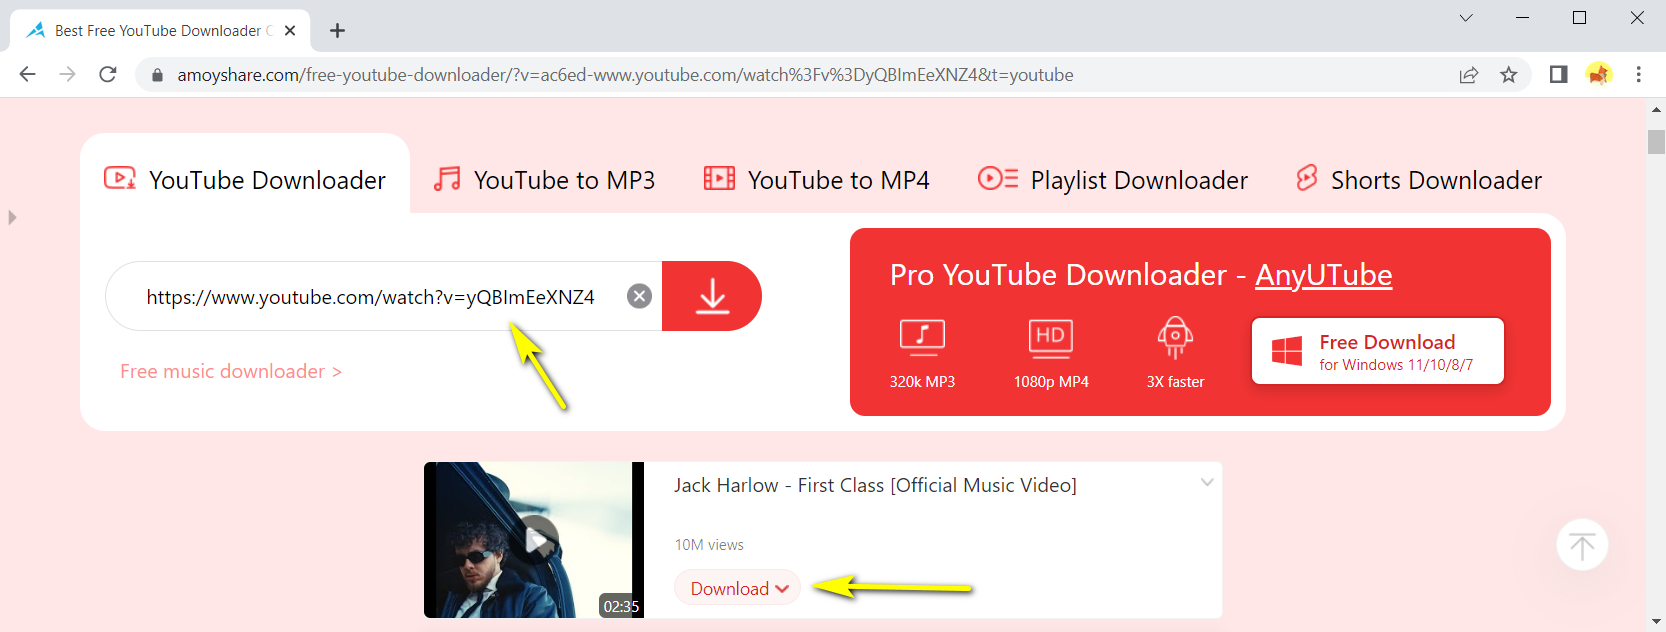 Save YouTube videos with Free YouTube Downloader